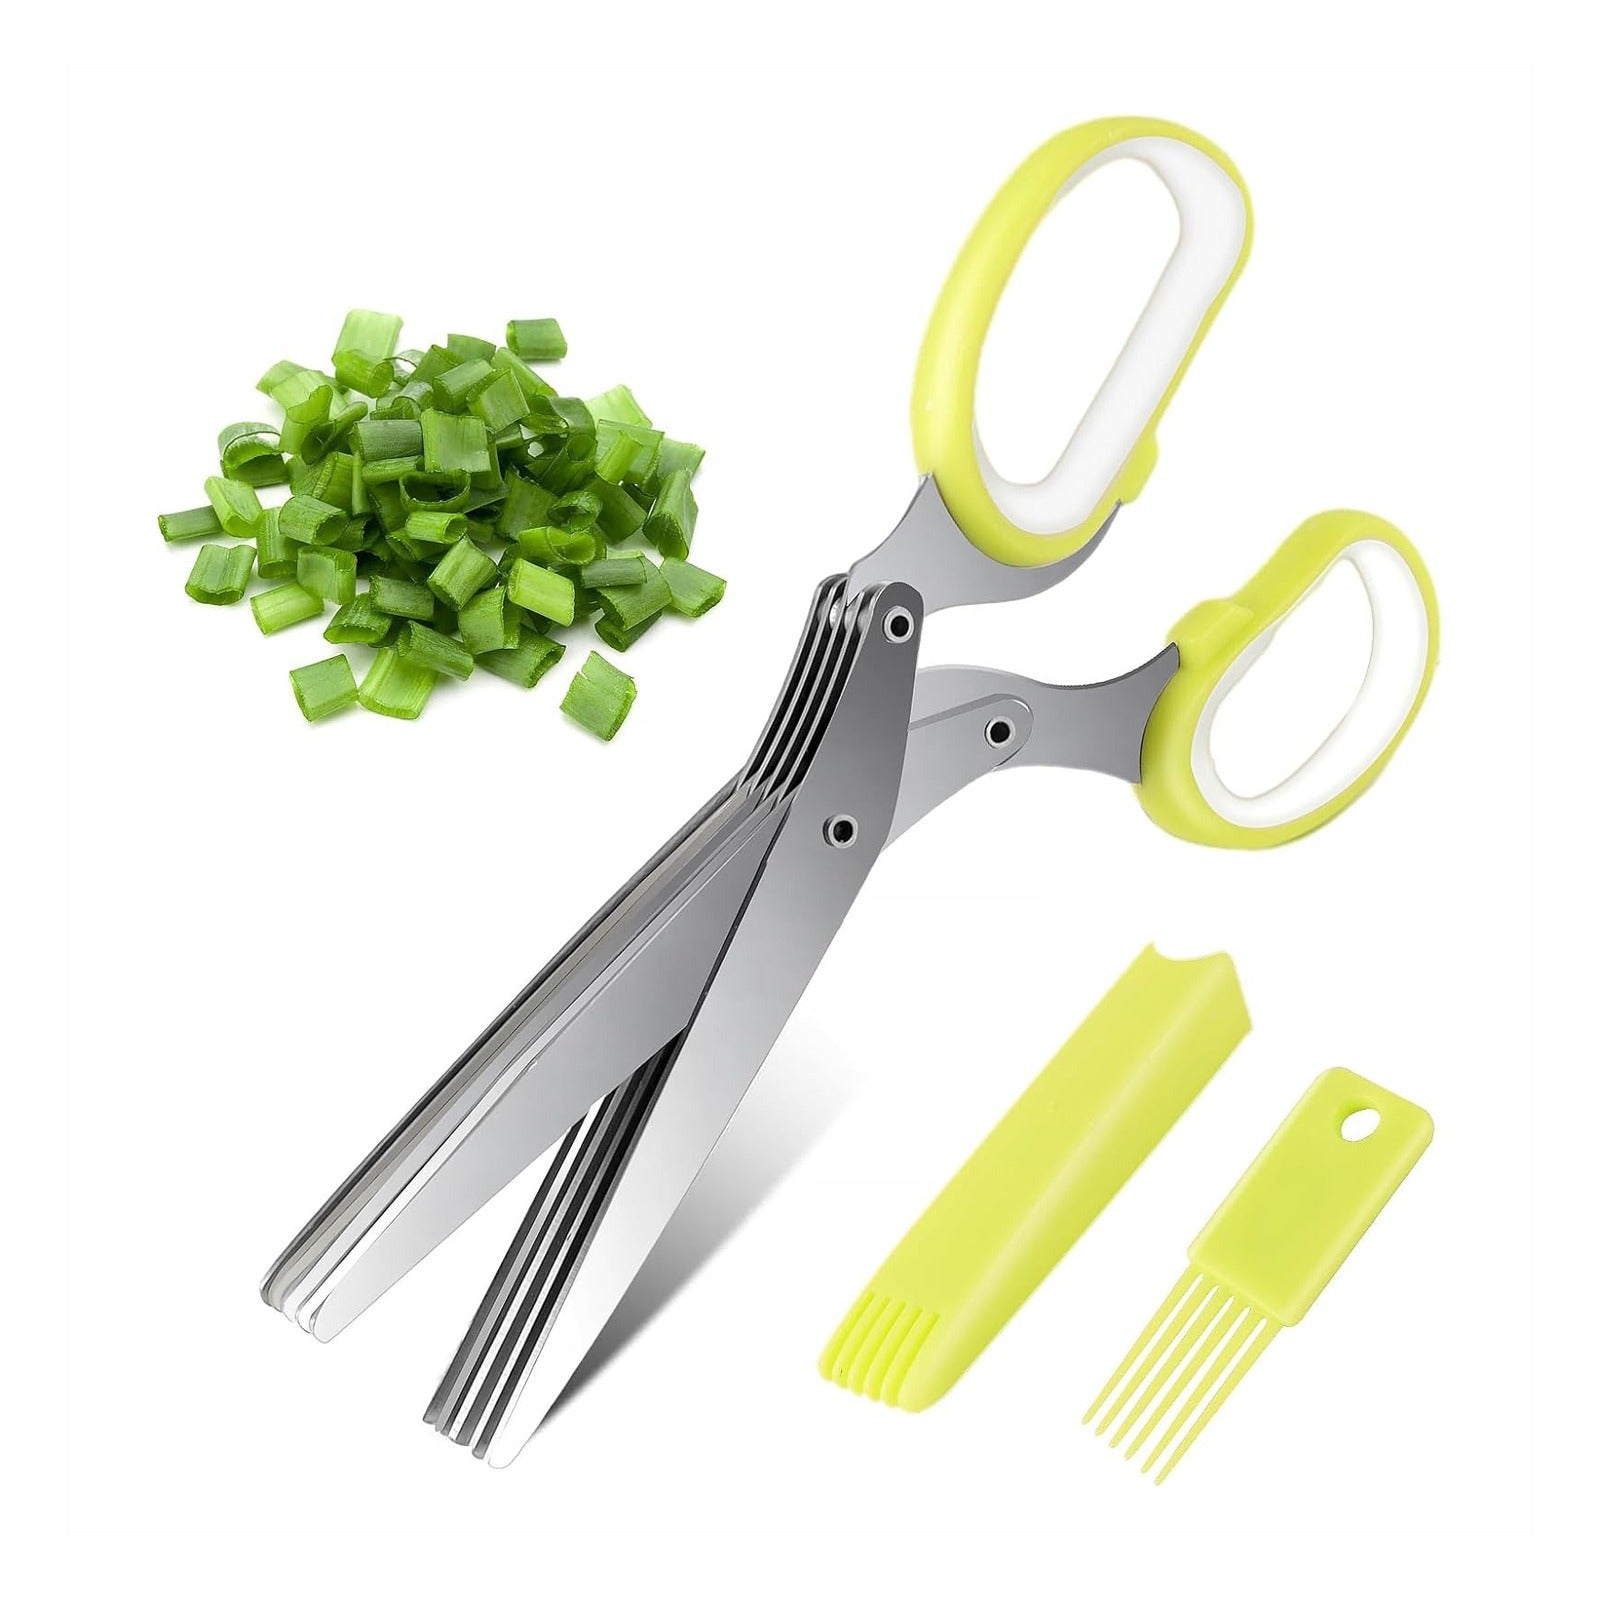  5 Blade Kitchen Scissor with handy comb for cleaning and blade cover